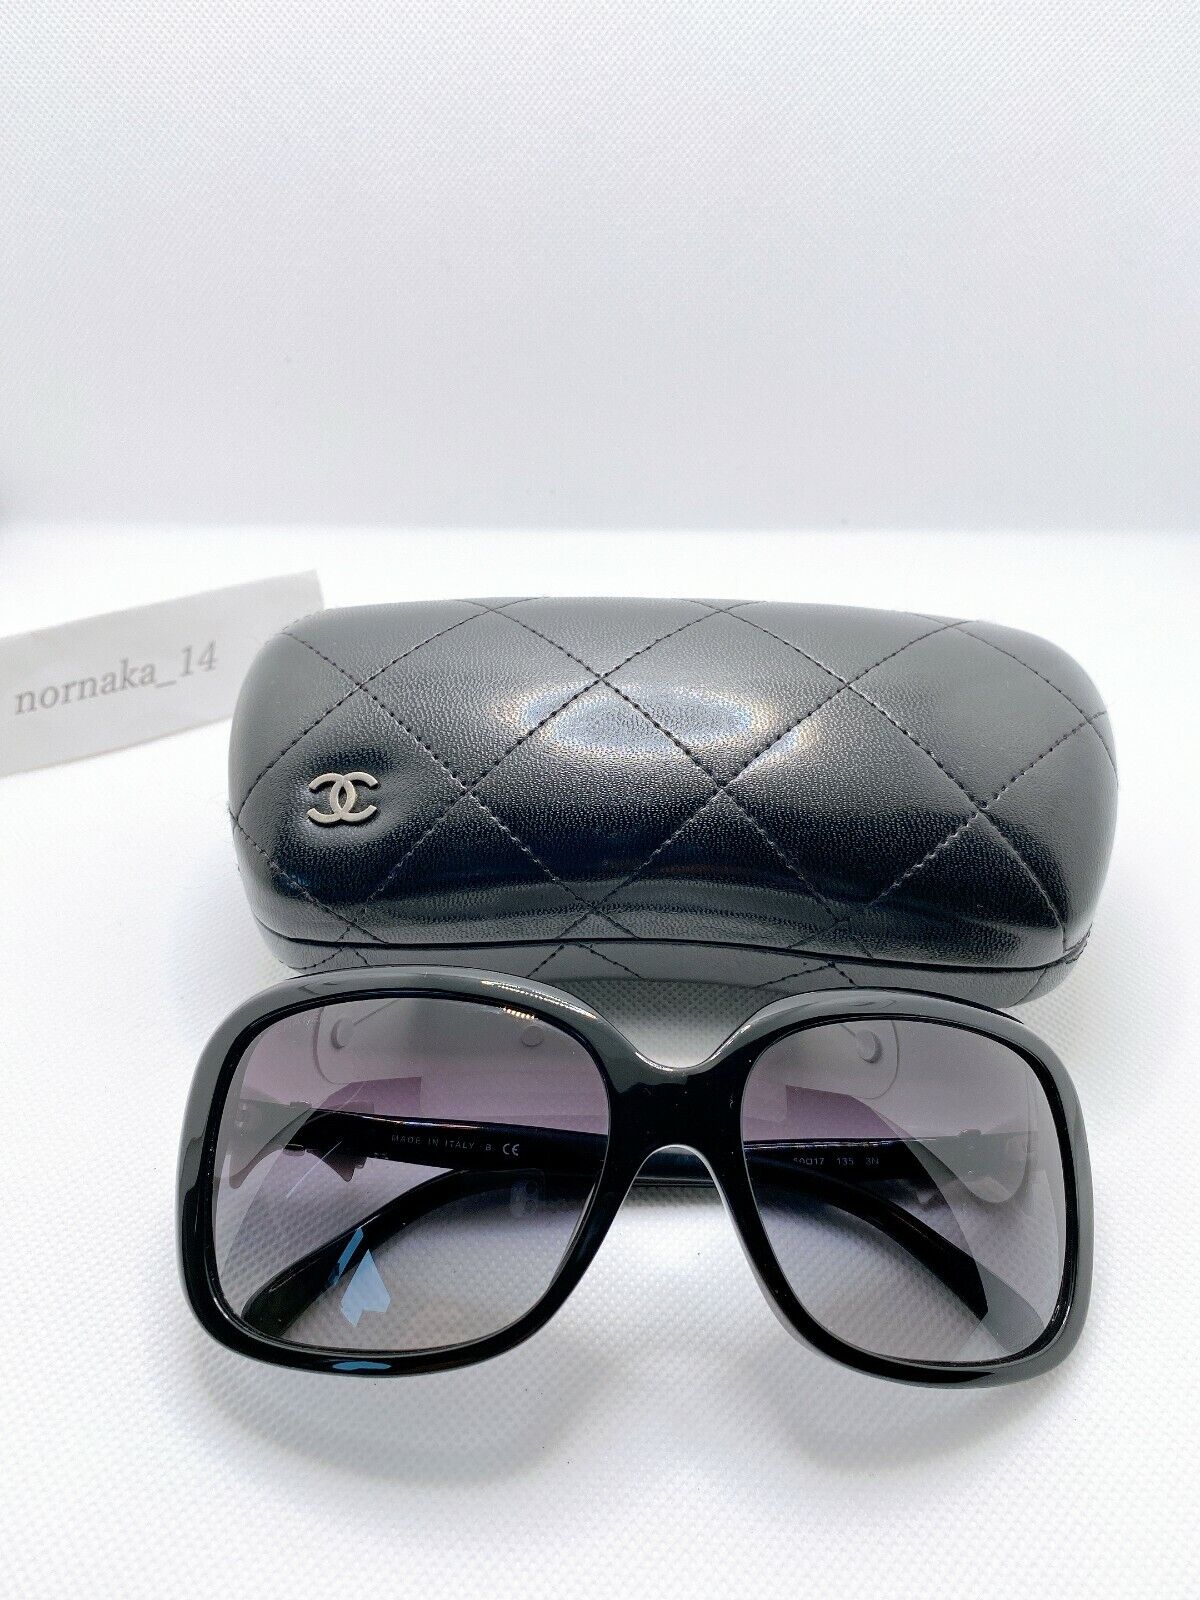 Near MINT CHANEL COCO Logos CC 5171-A Bow White Sunglasses with Case